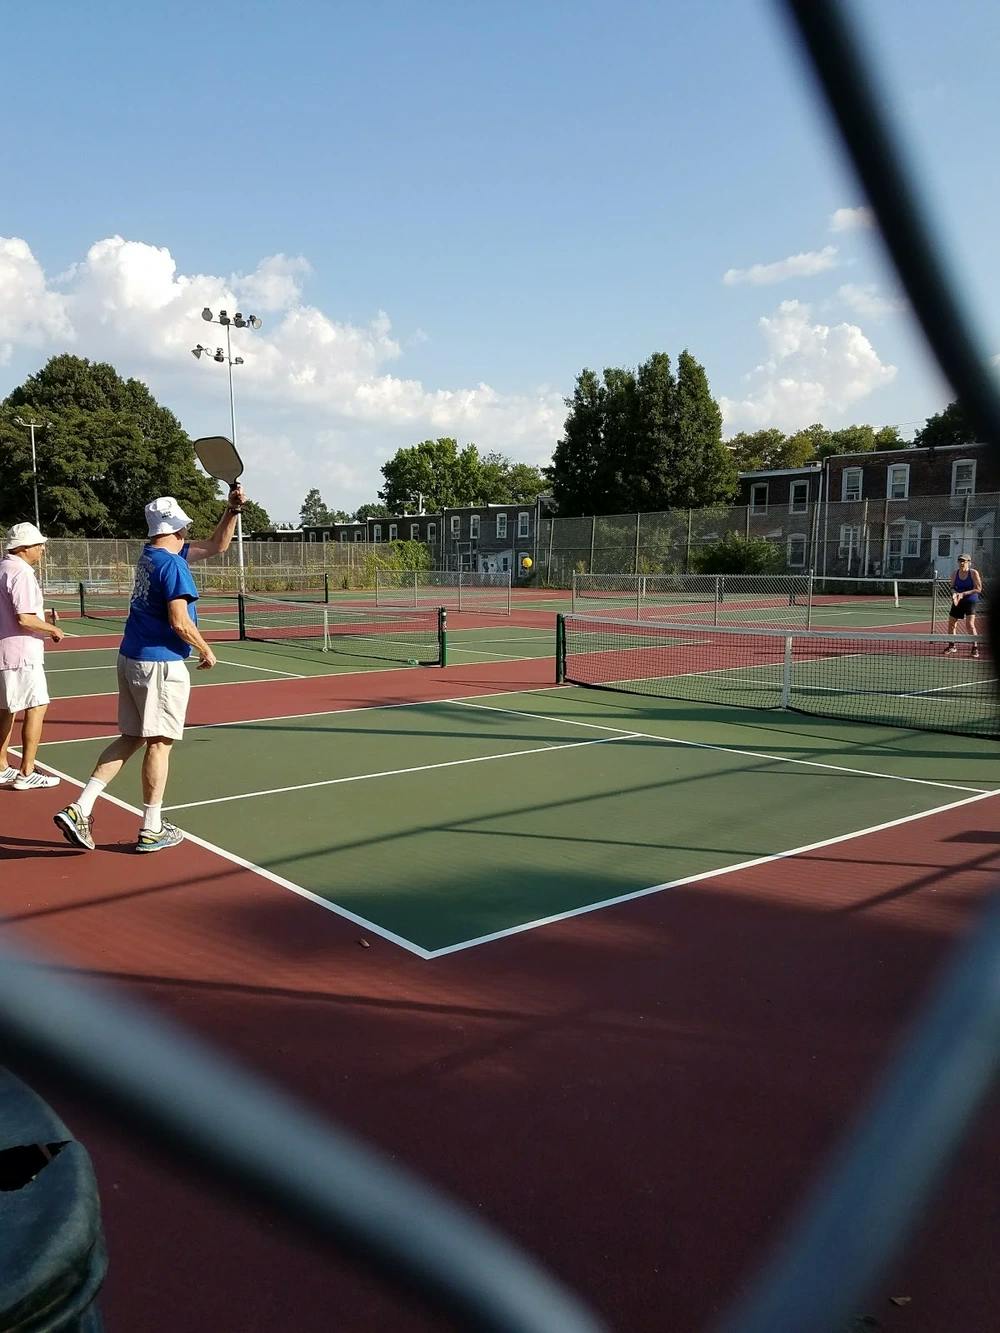 Image 1 of 2 of Water Tower Tennis & Pickleball Courts court